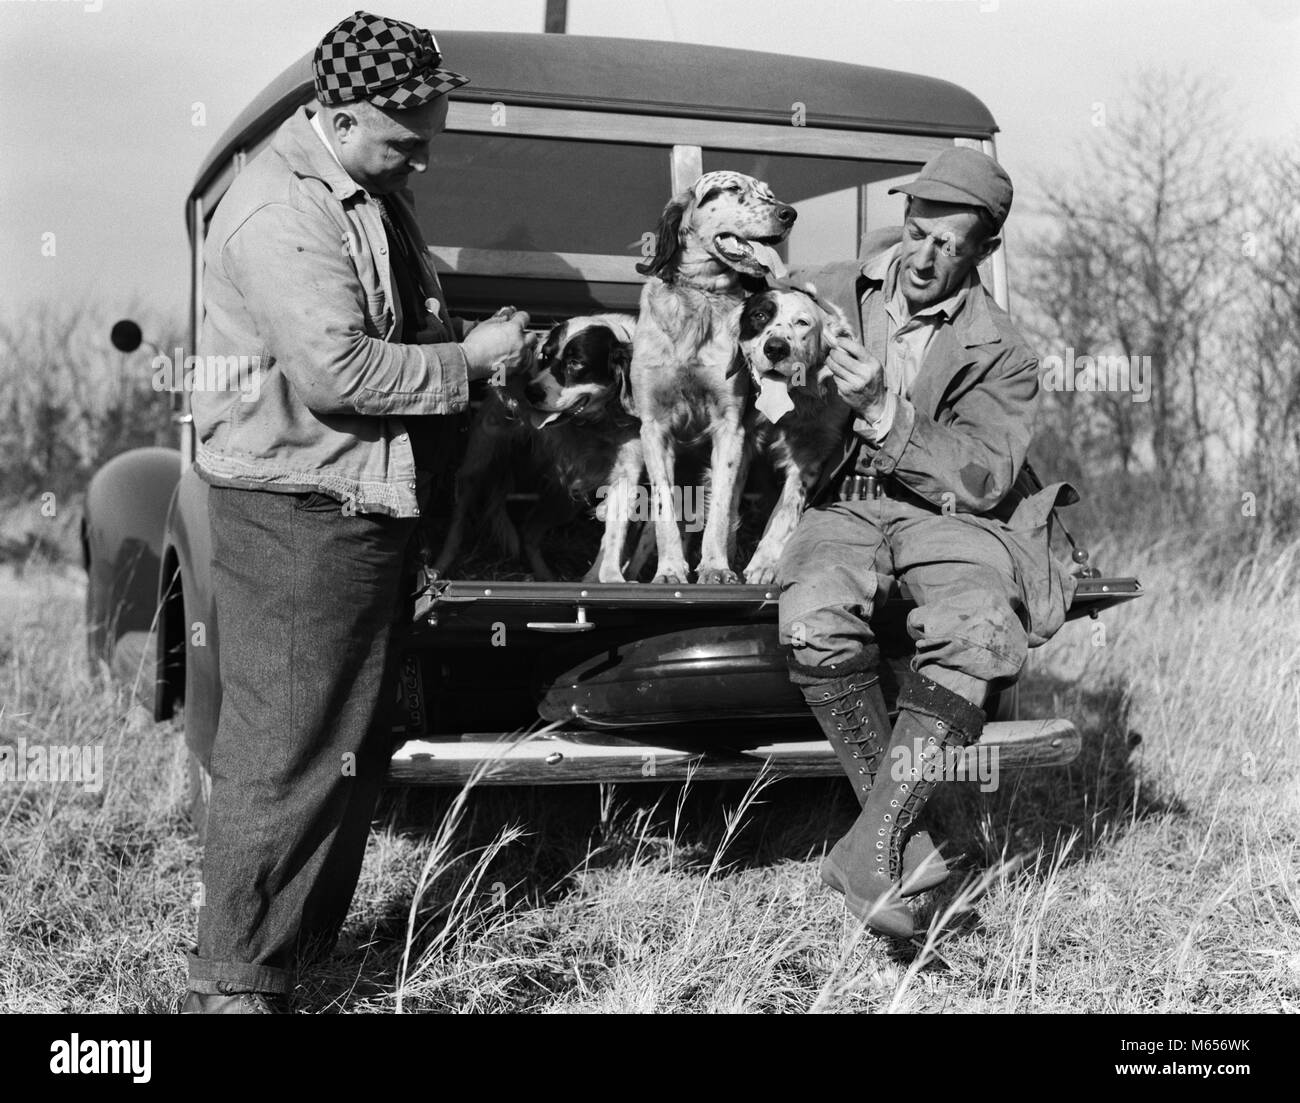 1930s TWO MEN IN HUNTING CLOTHES SITTING STANDING WITH ENGLISH SETTER DOGS ON BACK OF WOODIE STATION WAGON  - g1079 HAR001 HARS 35-40 YEARS TWO ANIMALS MAMMALS ADVENTURE RELAXATION AUTOS CANINES EXCITEMENT RECREATION WOODY WOODIE ENGLISH SETTER ENGLISH SETTERS STATION WAGON AUTOMOBILES VEHICLES CANINE HUNTERS MALES MAMMAL MID-ADULT MID-ADULT MAN SETTER TAILGATE B&W BLACK AND WHITE CAUCASIAN ETHNICITY OLD FASHIONED PERSONS Stock Photo